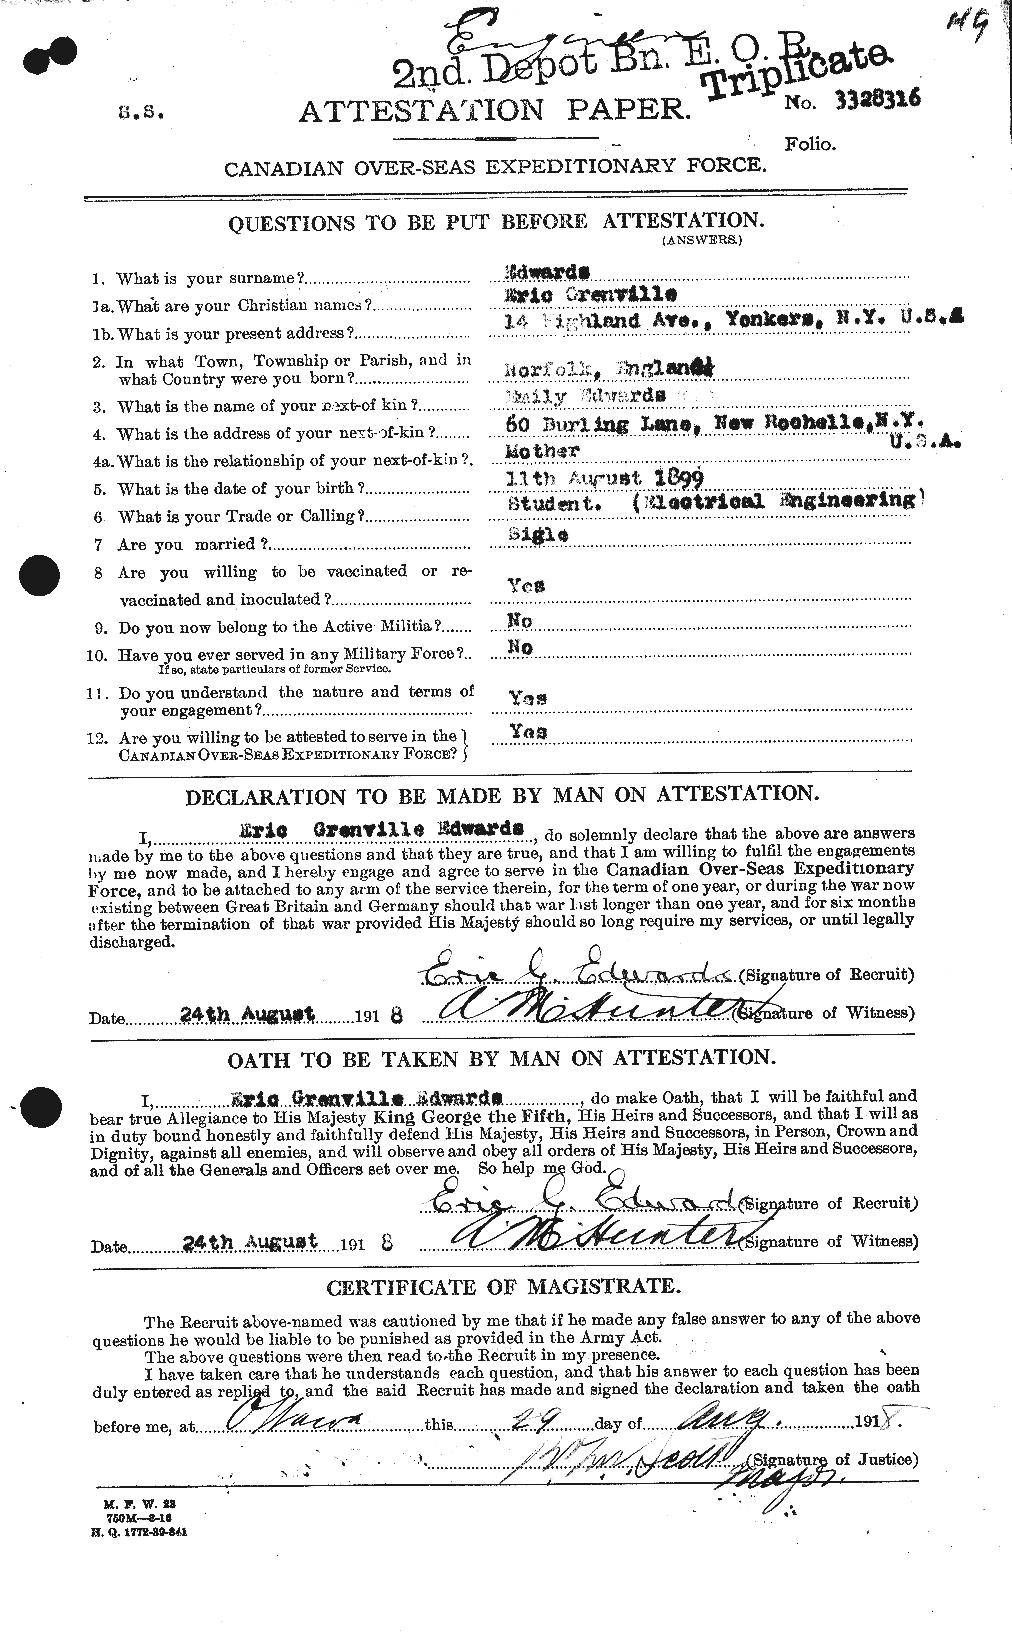 Personnel Records of the First World War - CEF 307919a